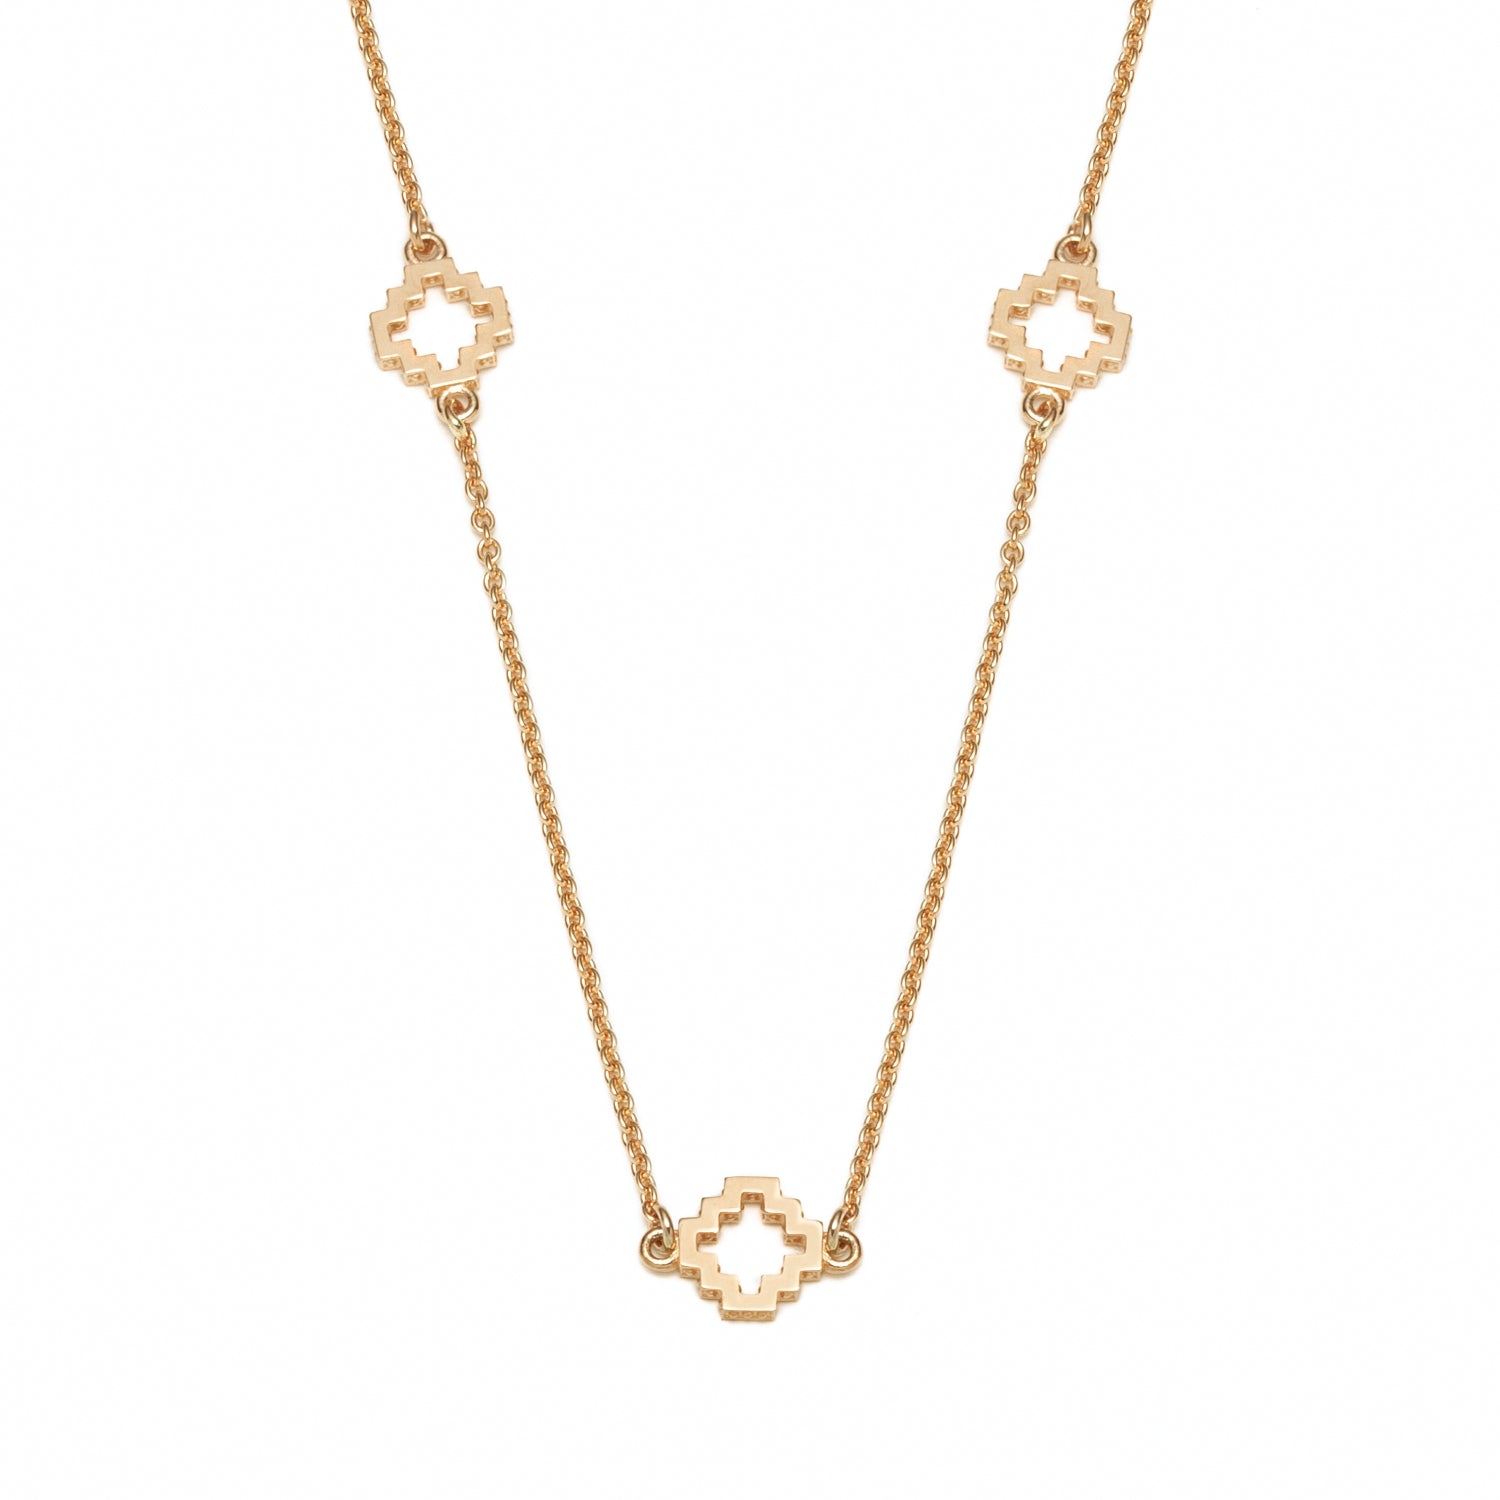 Seven Mini Step Motif Necklace in Yellow Gold